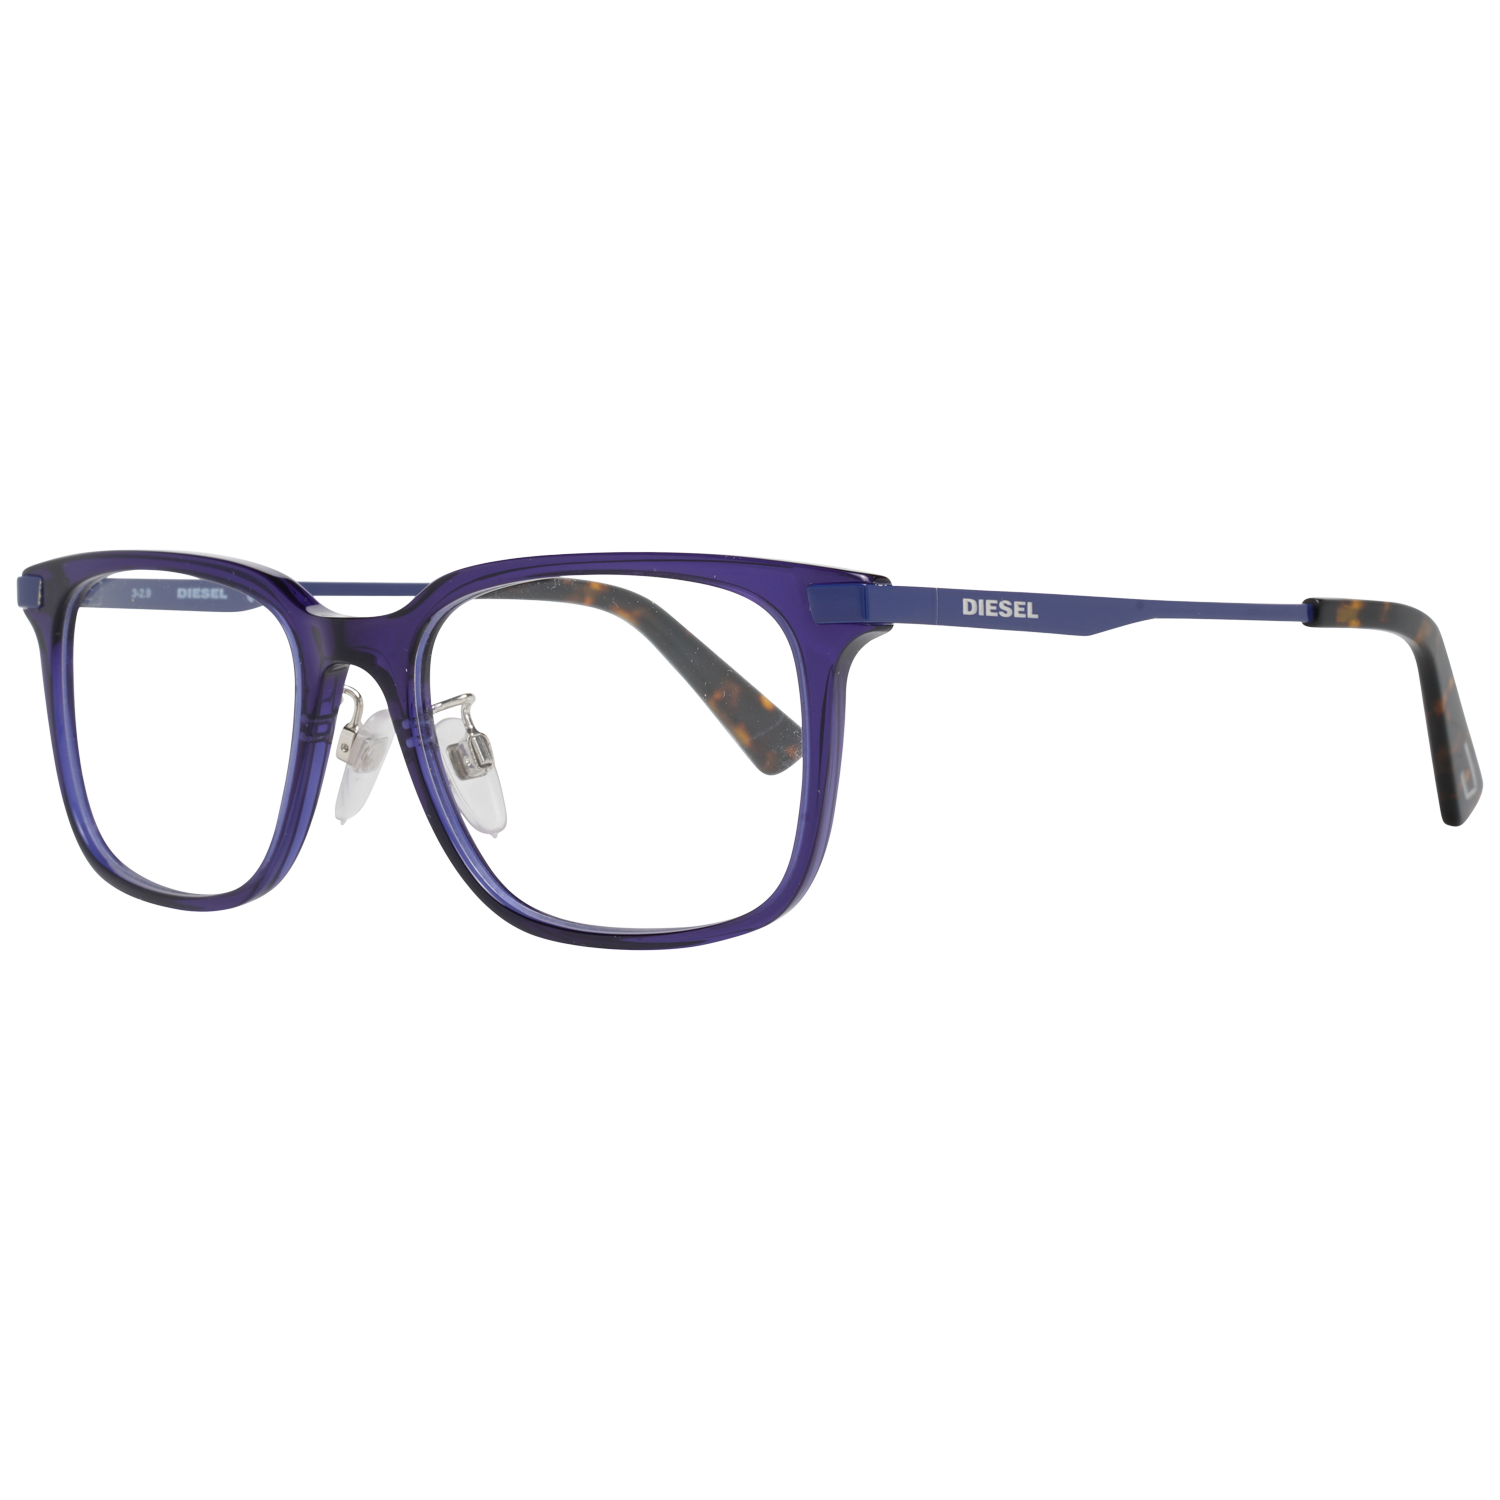 GenderMenMain colorBlueFrame colorBlueFrame materialMetal & PlasticSize53-18-145Lenses width53mmLenses heigth40mmBridge length18mmFrame width140mmTemple length145mmShipment includesCase, Cleaning clothStyleFull-RimSpring hingeNoExtraNo extra